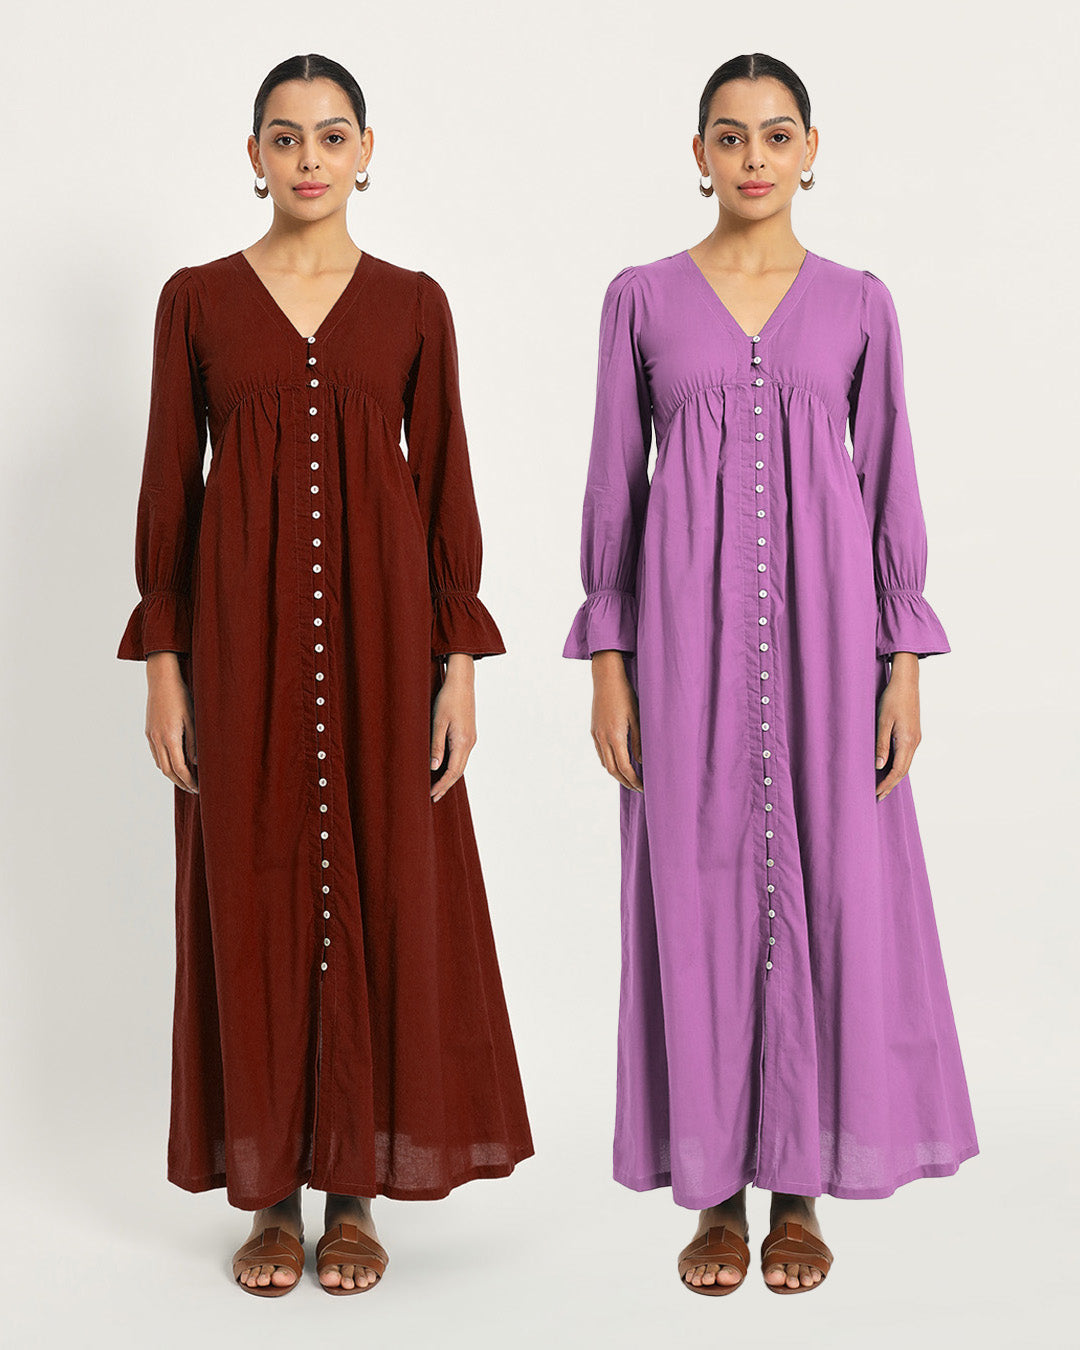 Combo: Russet Red & Wisteria Purple Day-Night Ease Nightdress